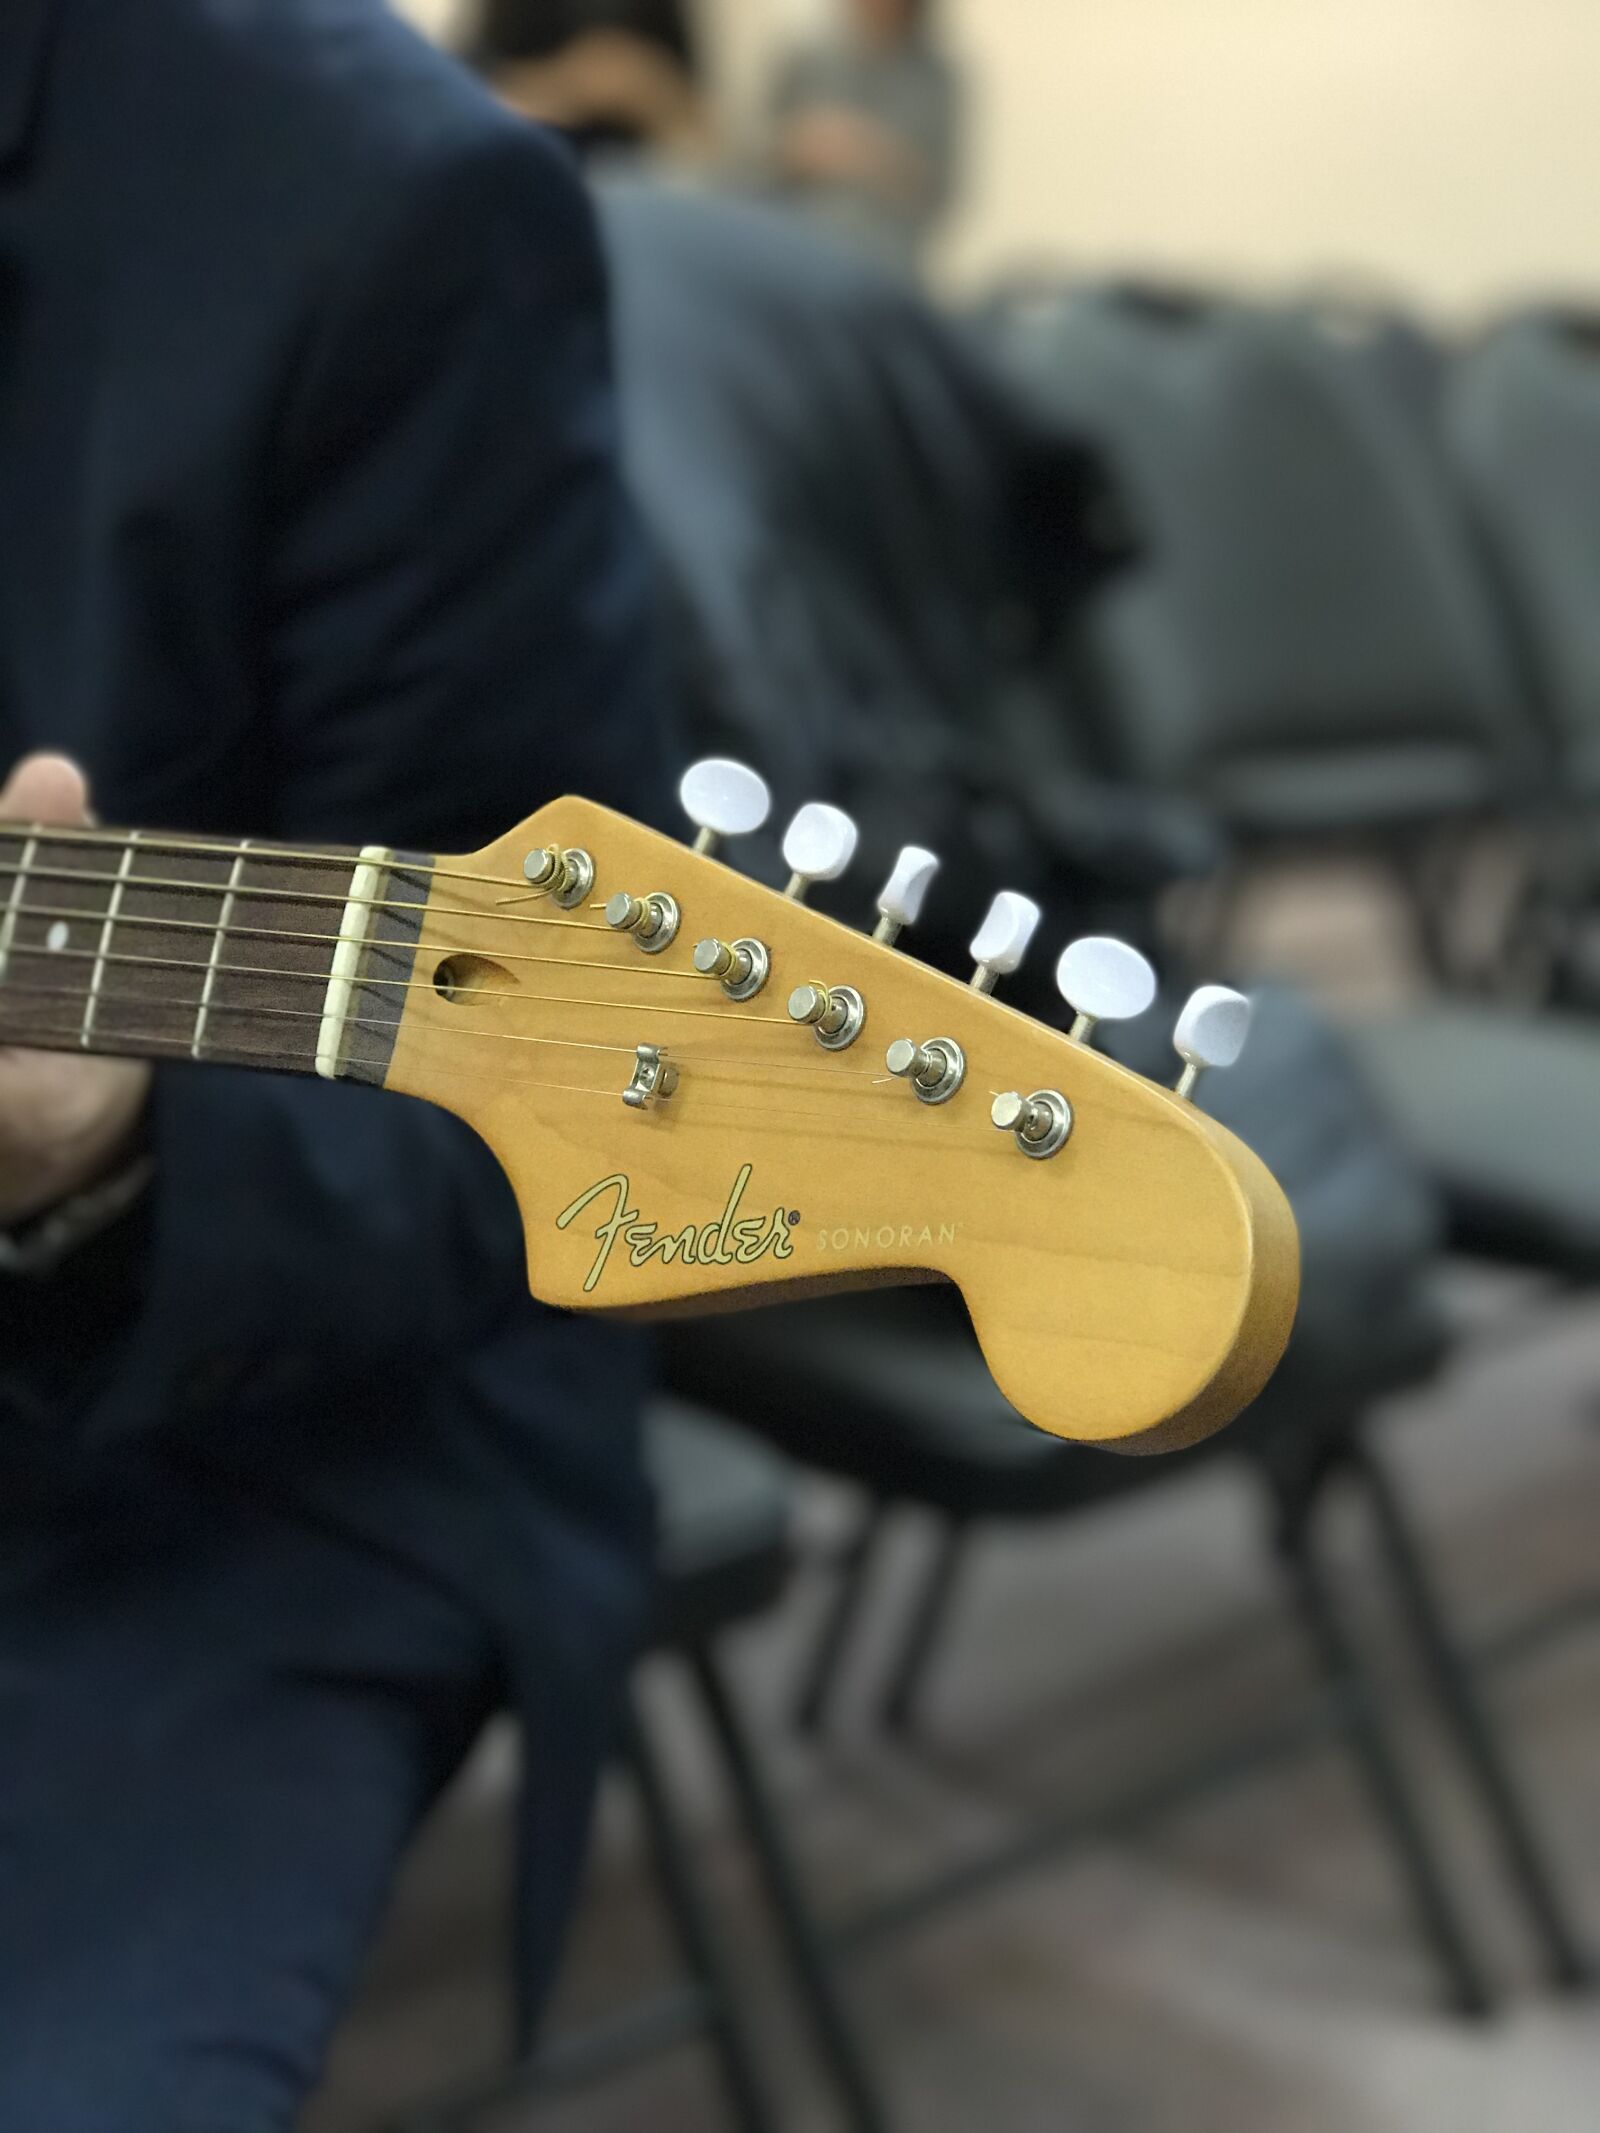 iPhone 7 Plus back iSight Duo camera 6.6mm f/2.8 sample photo. Fender, guitar, headstock photography